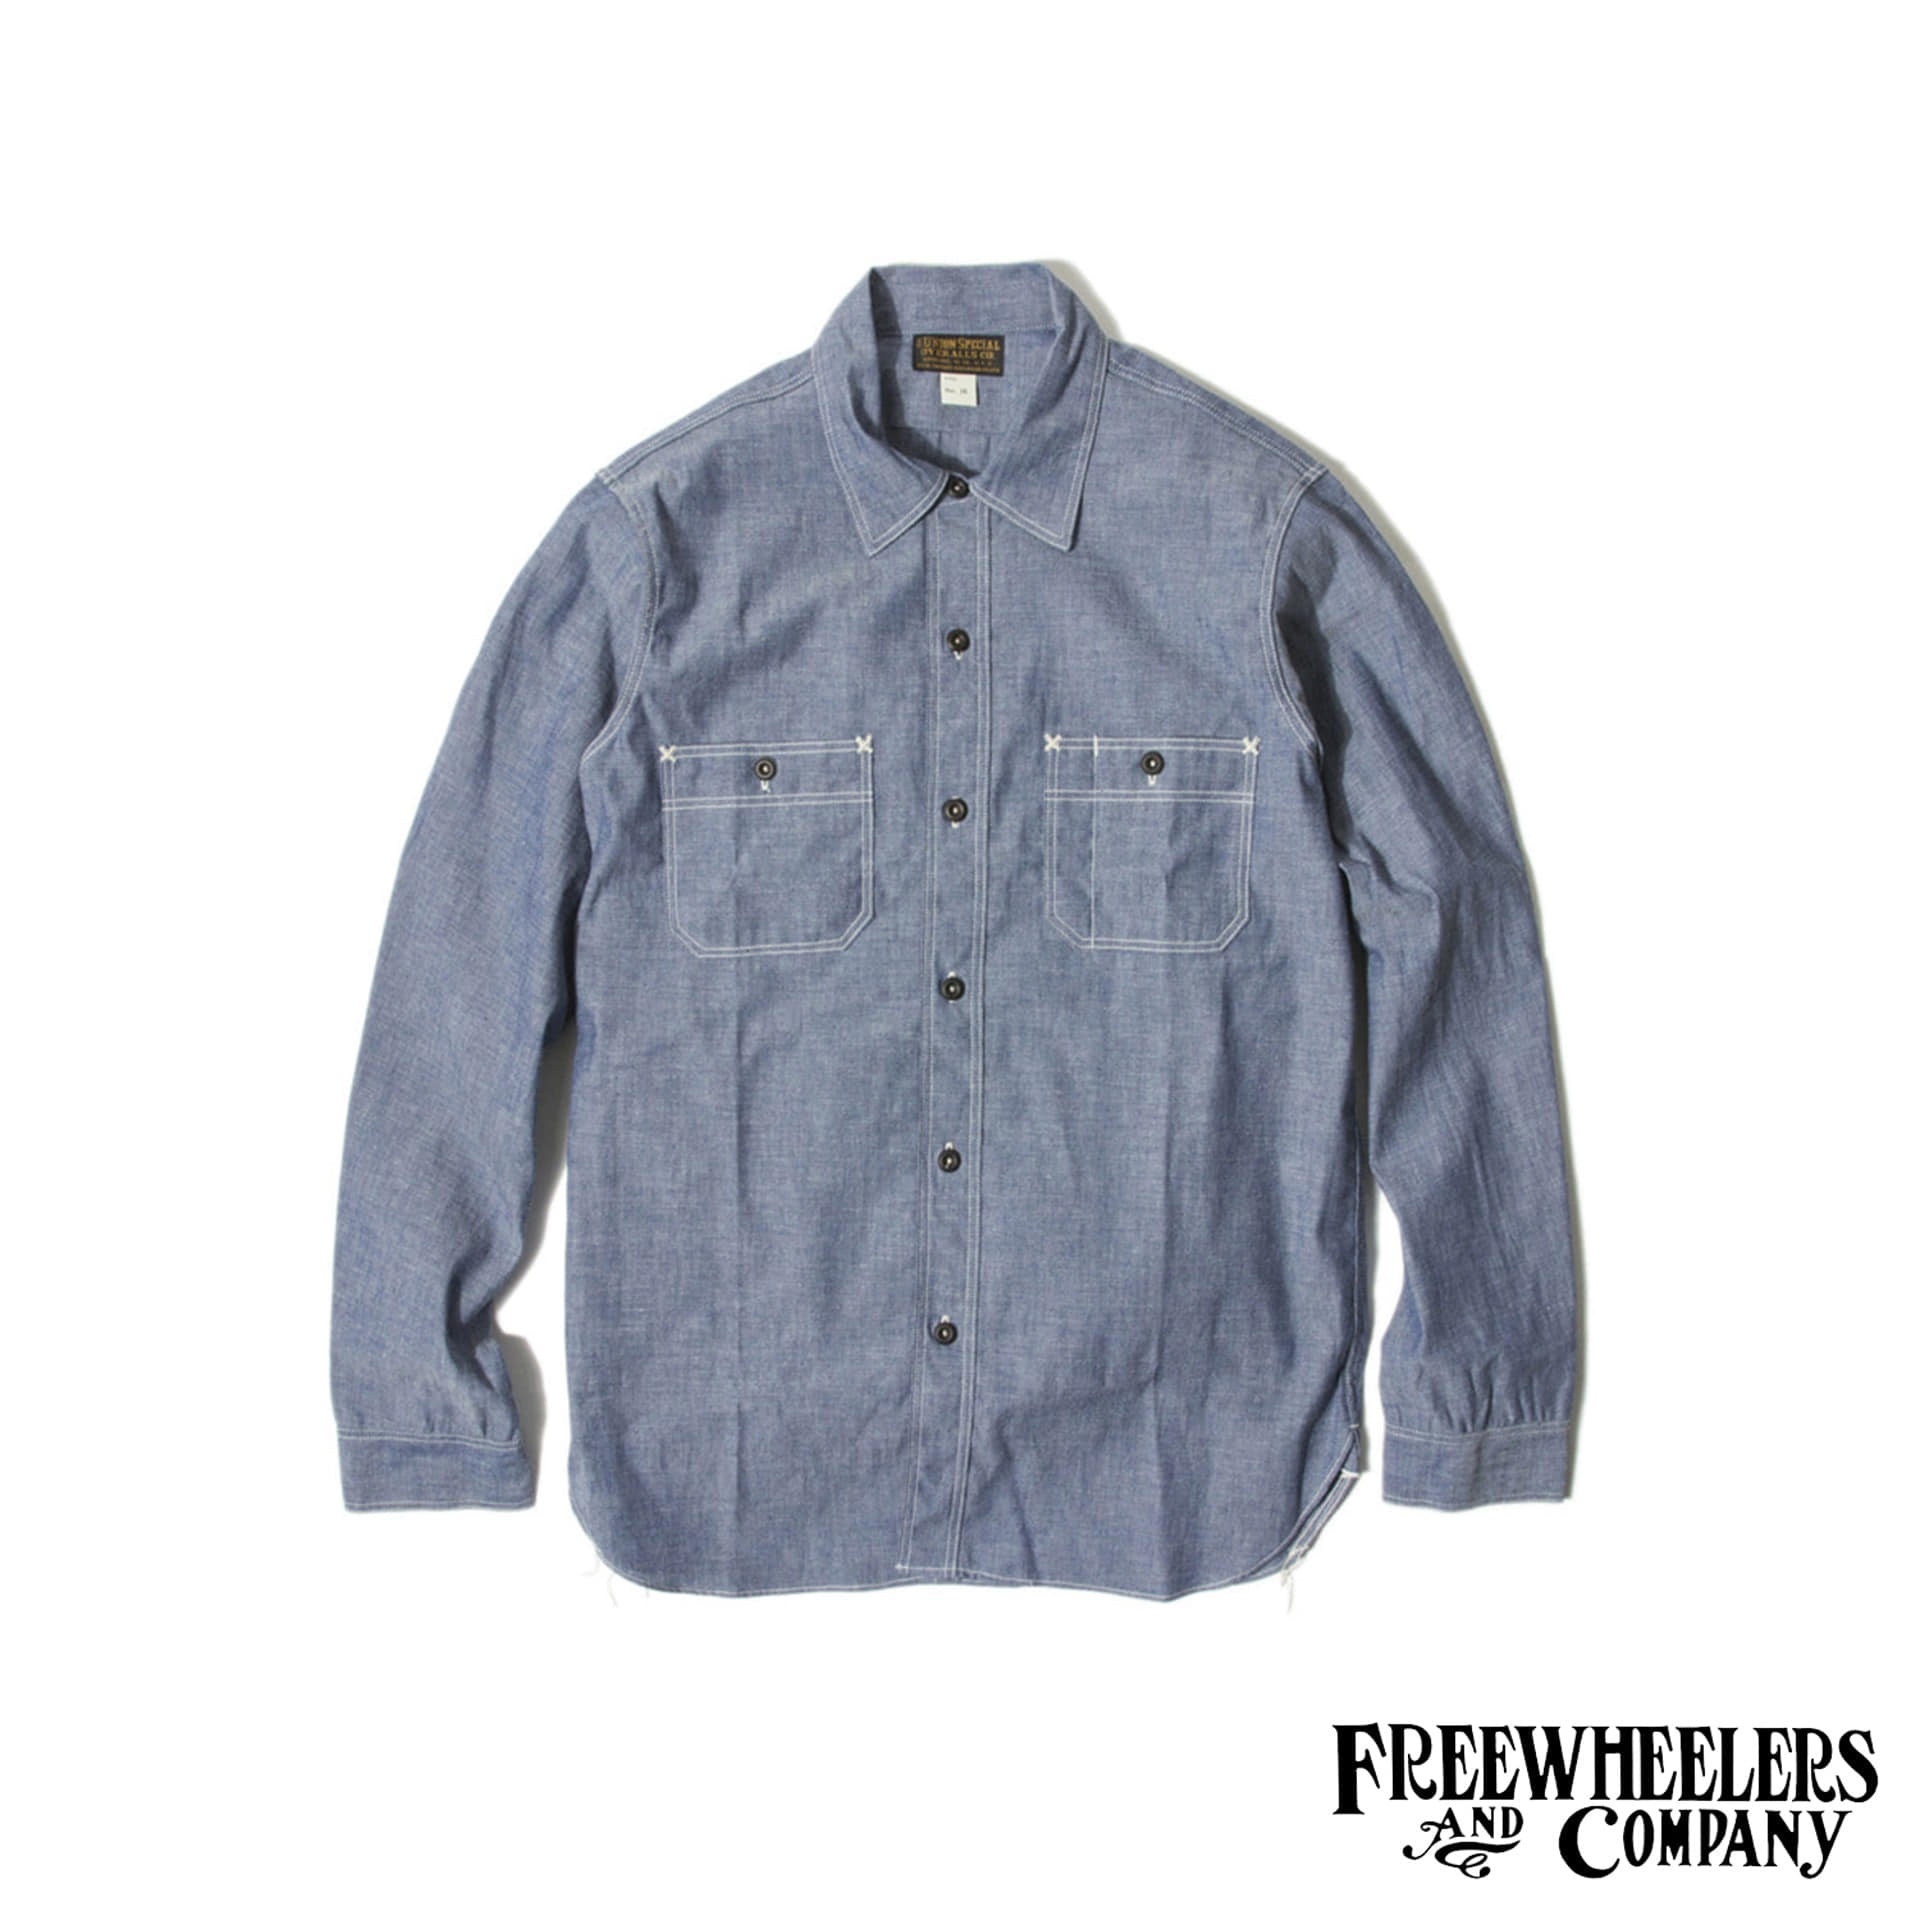  [UNION SPECIAL OVERALLS]  Work Shirt  &quot;NEAL&quot;  (Vintage Indigo Chambray) 5/3 Open